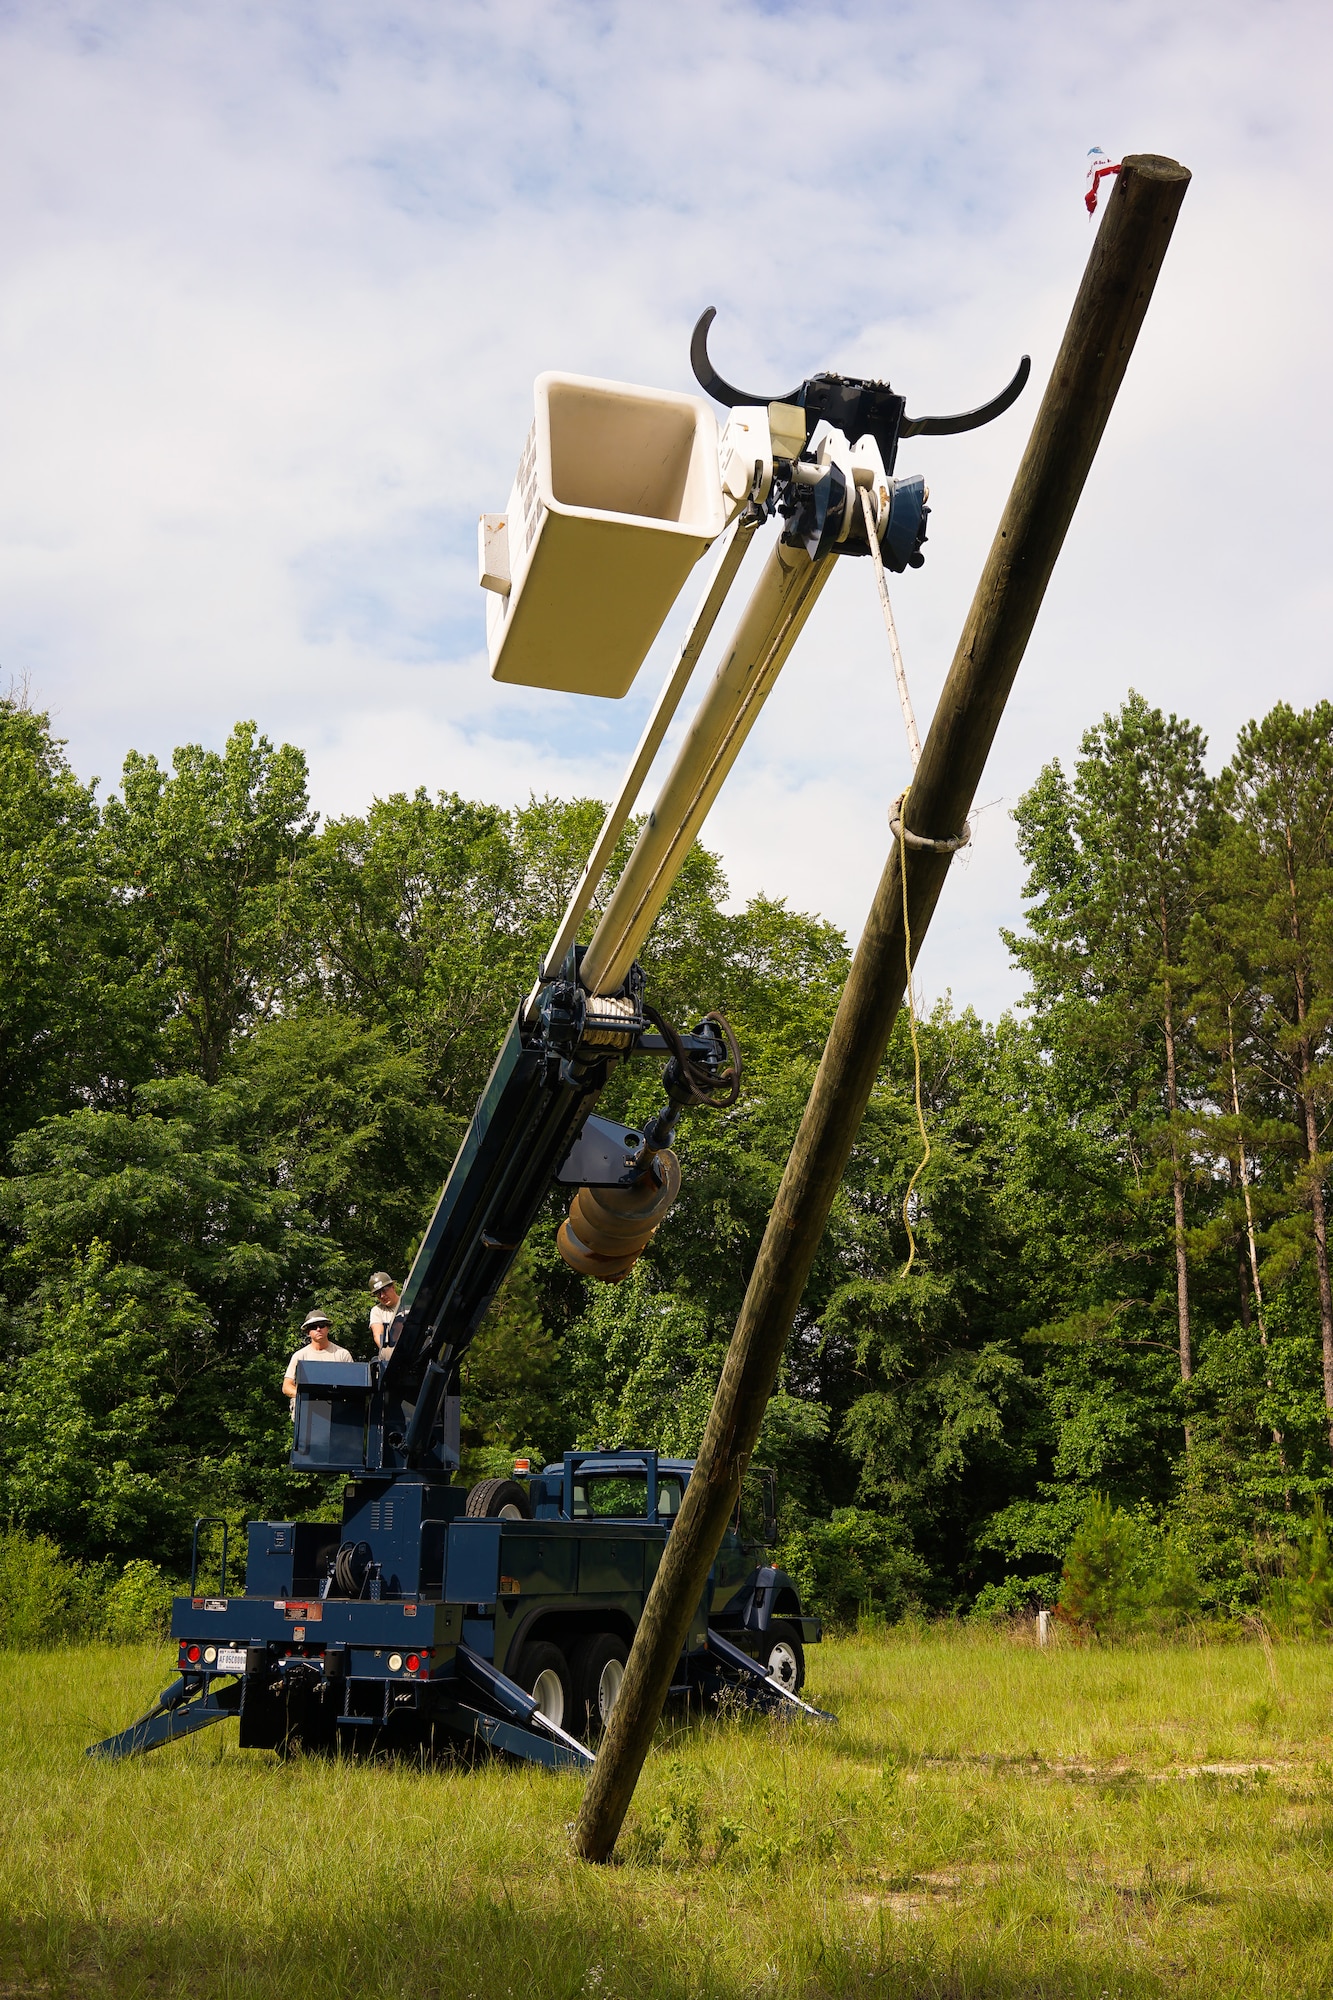 U.S. Airmen with the 202nd Engineering Installation Squadron (EIS), Georgia Air National Guard, lift a telephone pole using a medium-profile truck during weeklong training exercise at Robins Air Force Base, Ga., June 11, 2015. More than 80 Airmen were certified in career-field tasks crucial to the unit’s deployed and homeland missions. The 202nd EIS supports the 116th Air Control Wing and is responsible for the fixed-communications infrastructures for 27 other locations, including the 165th Airlift Wing in Savannah, Georgia, and Air National Guard units in Puerto Rico and the U.S. Virgin Islands. (U.S. Air National Guard photo by Senior Master Sgt. Roger Parsons/Released)